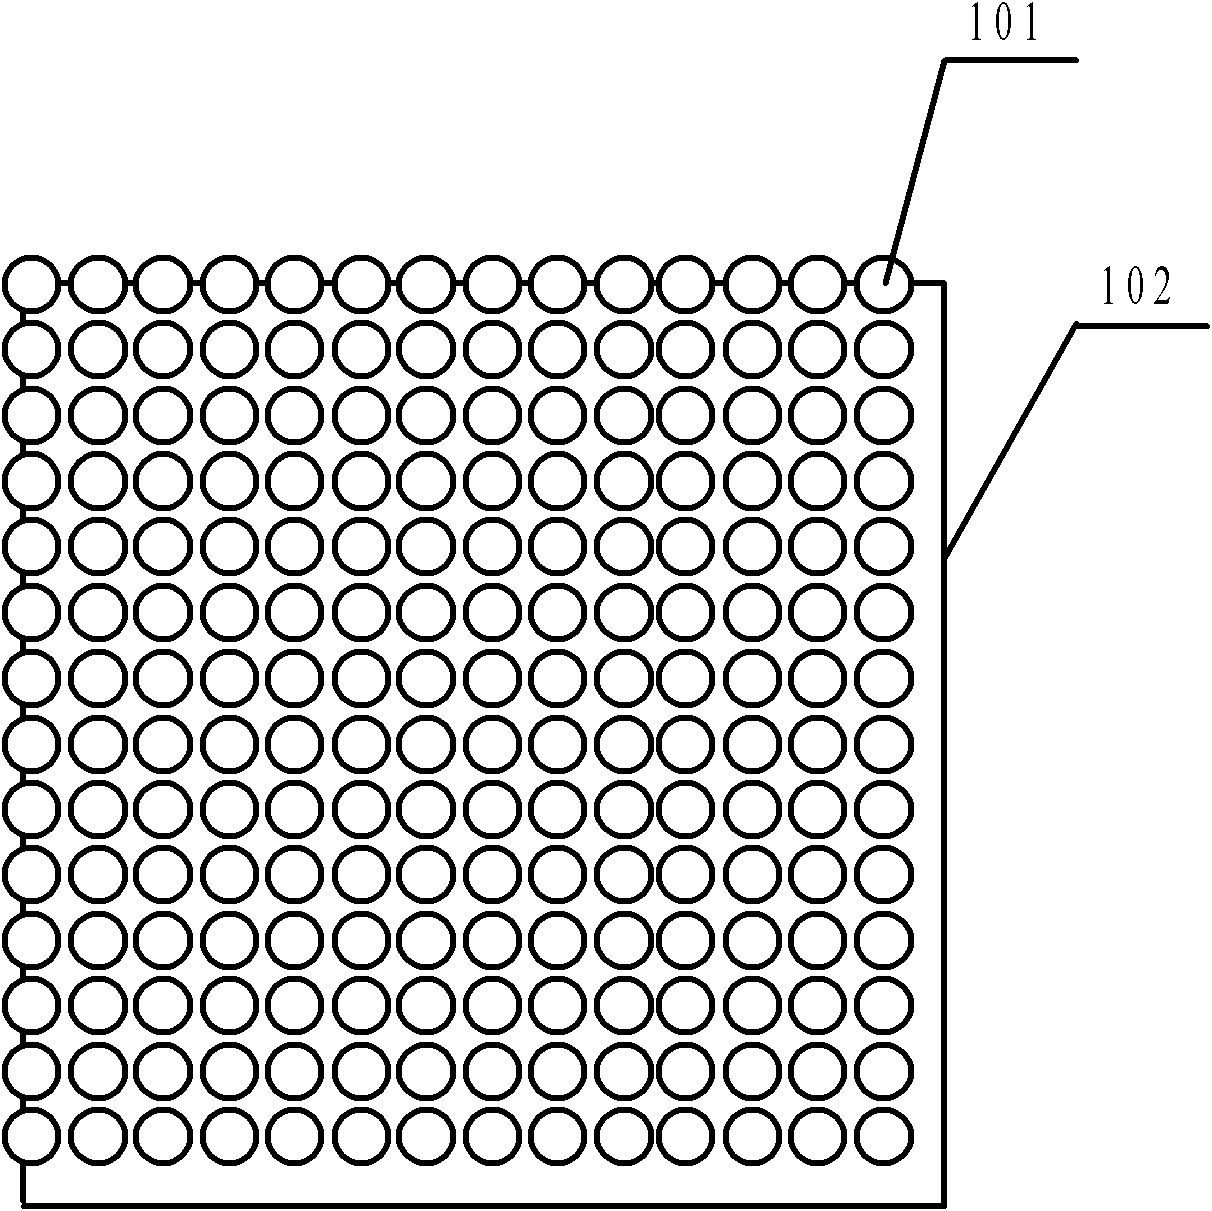 Seamlessly-spliced standard LED (light emitting diode) unit board and LED display device